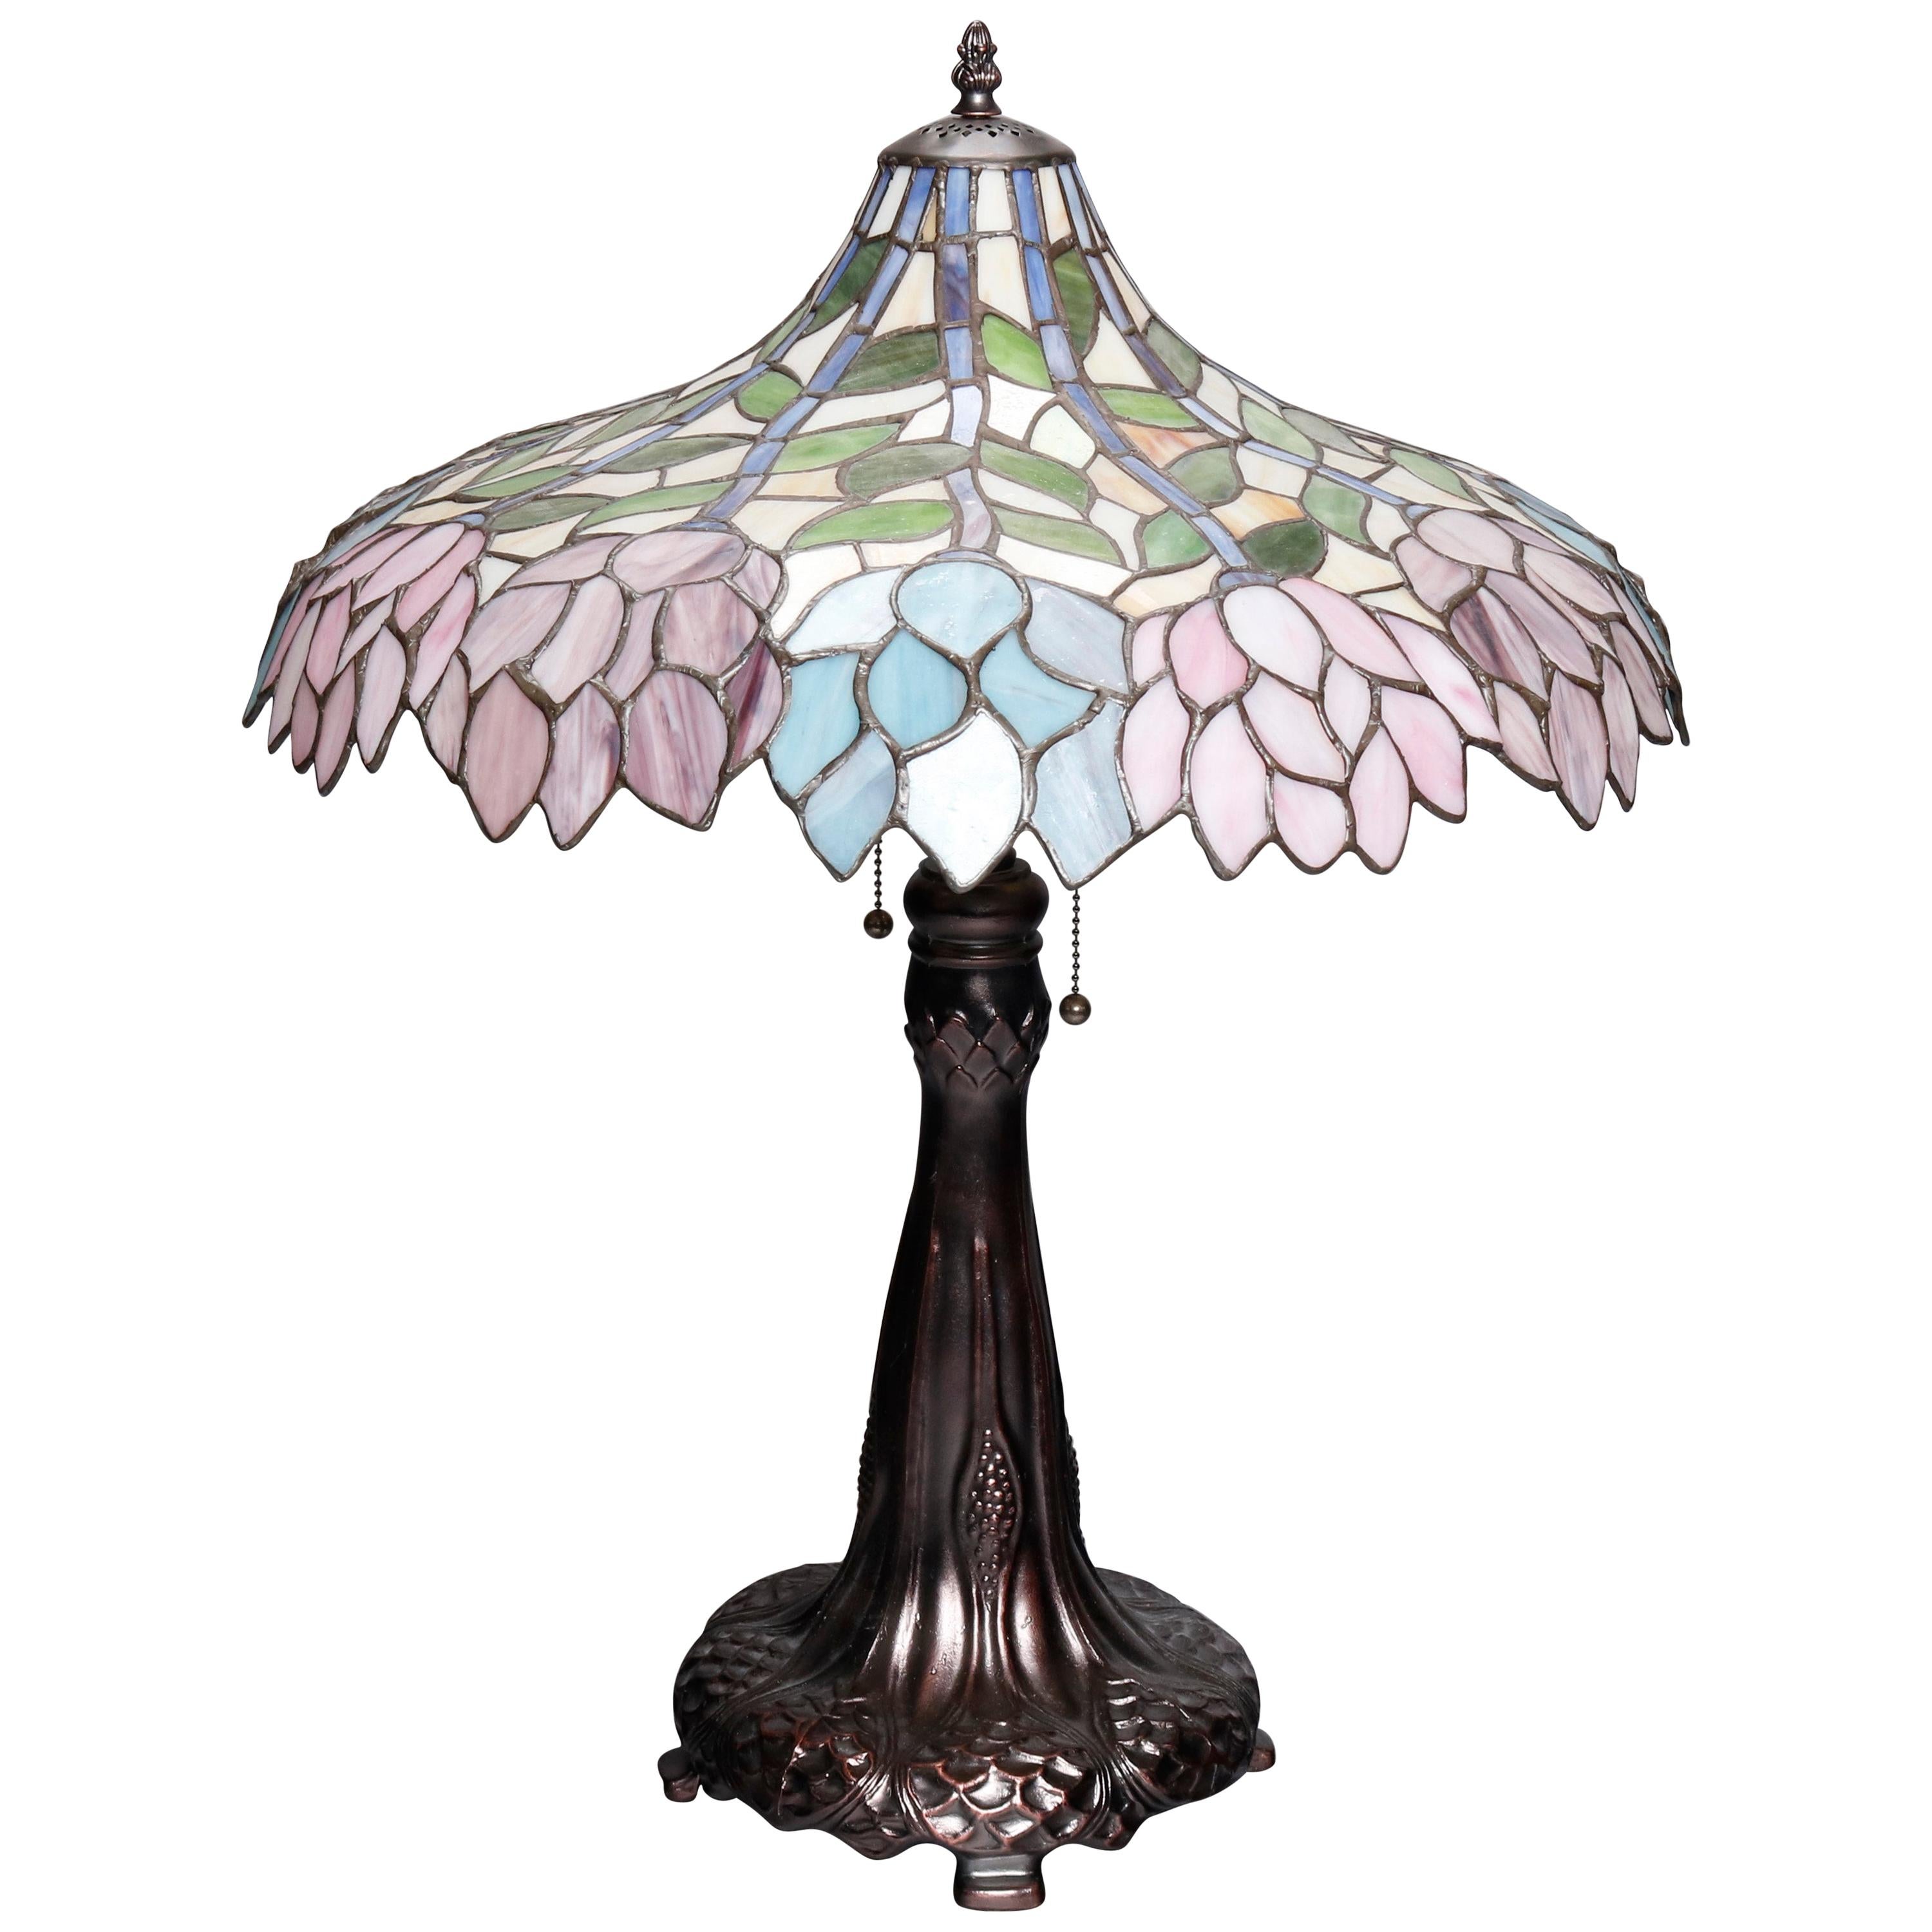 Arts & Crafts Style Tiffany School Leaded Glass Mosaic Table Lamp, 20th Century